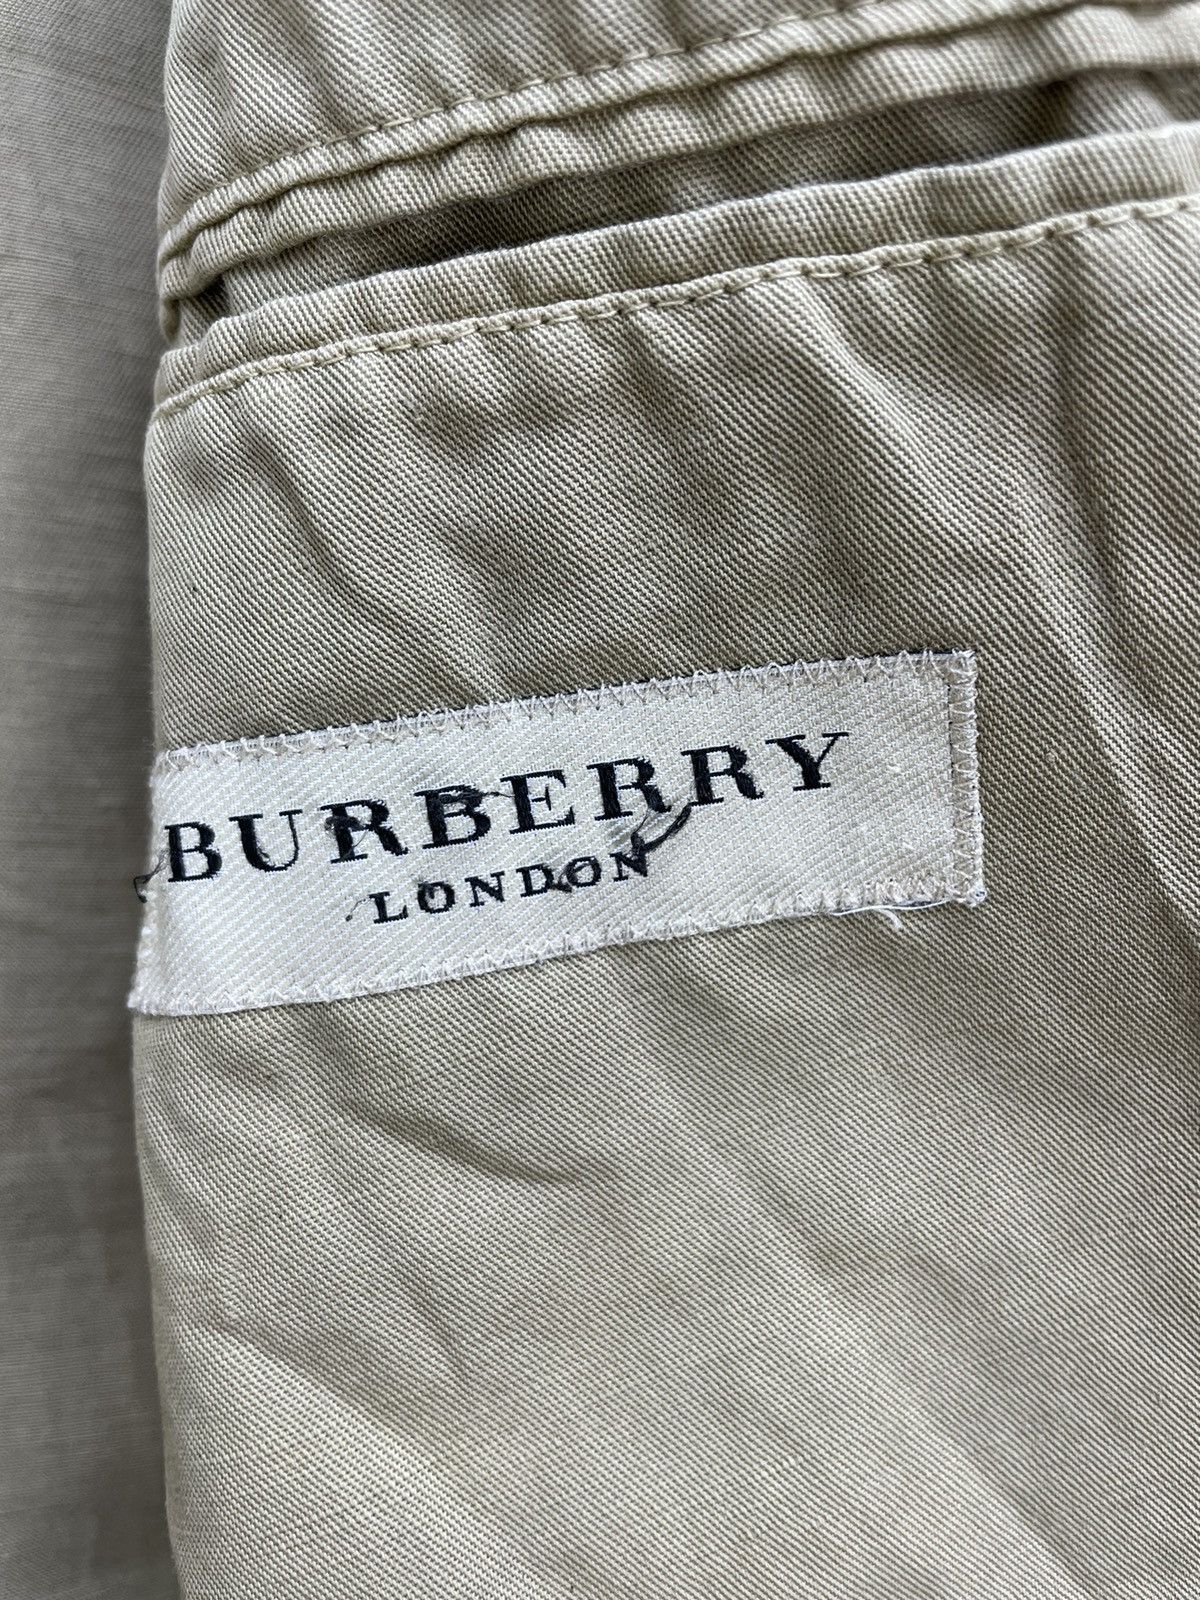 Burberry London Casual Jacket - 6